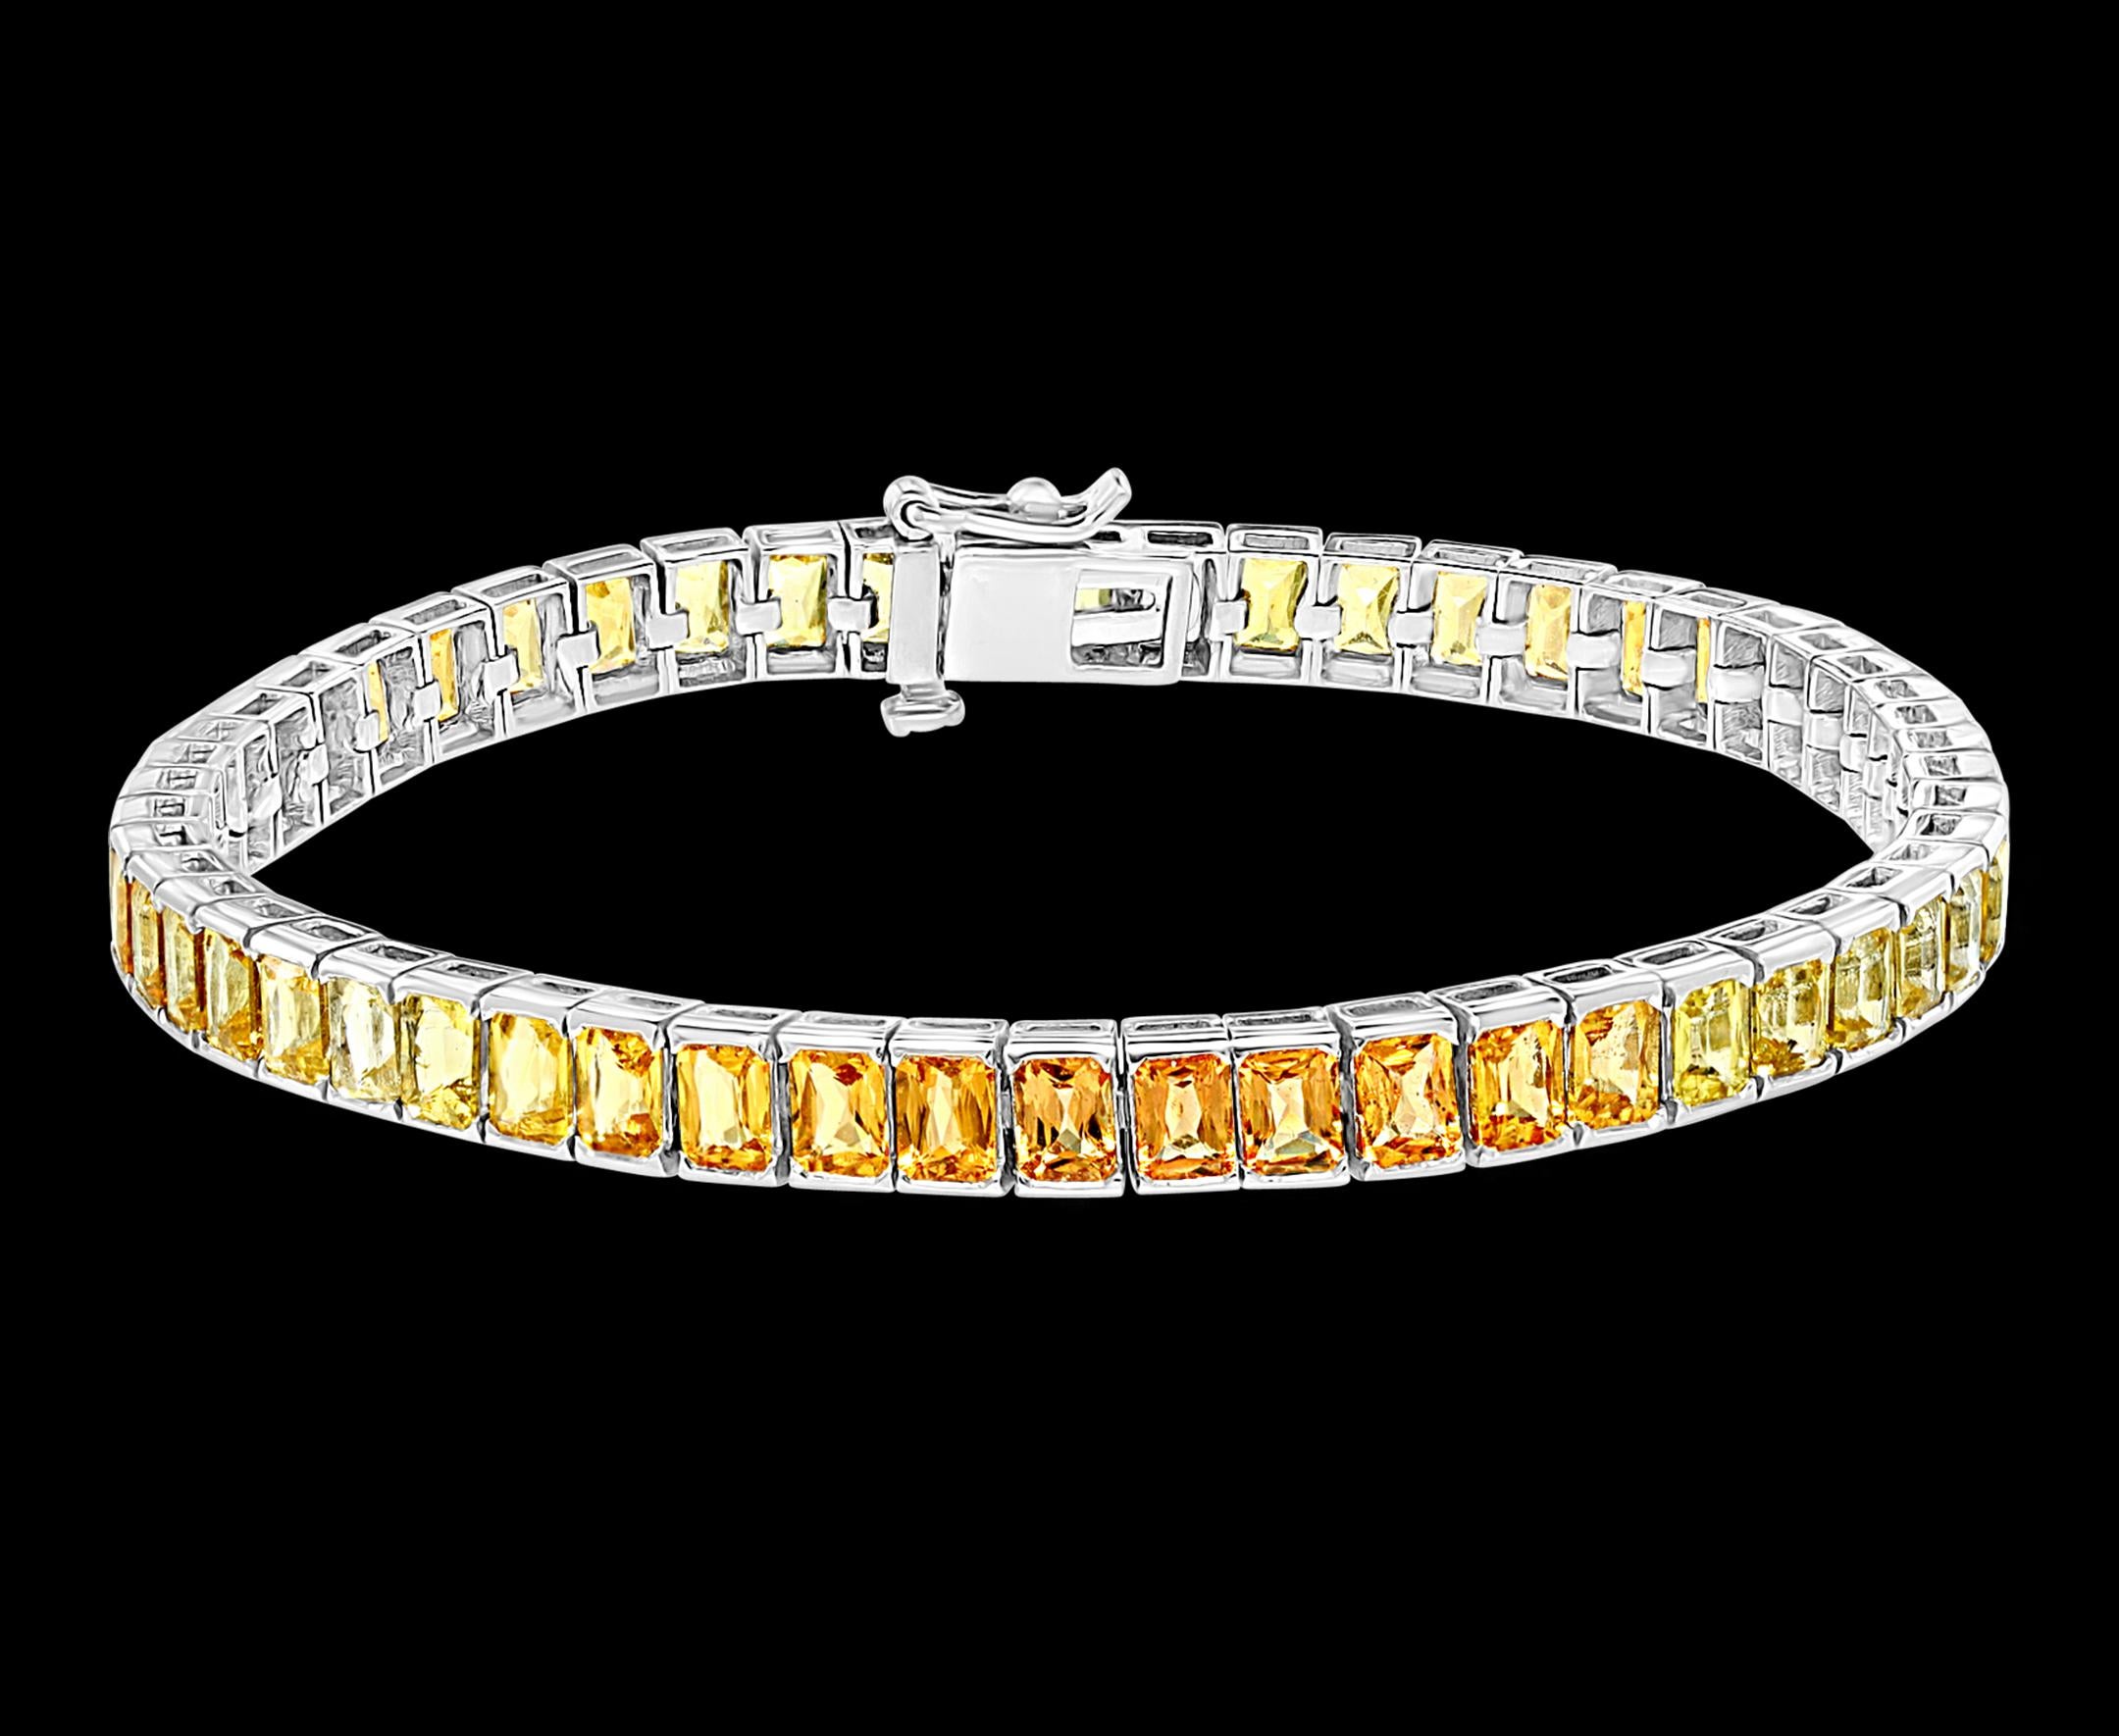  This exceptionally affordable Tennis  bracelet has  Radiant cut Natural Yellow sapphires .
 Sapphires  colors are different shades of yellow from light yellow to gradually going to Orange.
Beautiful colors , very Vibrant
Size of the stone is